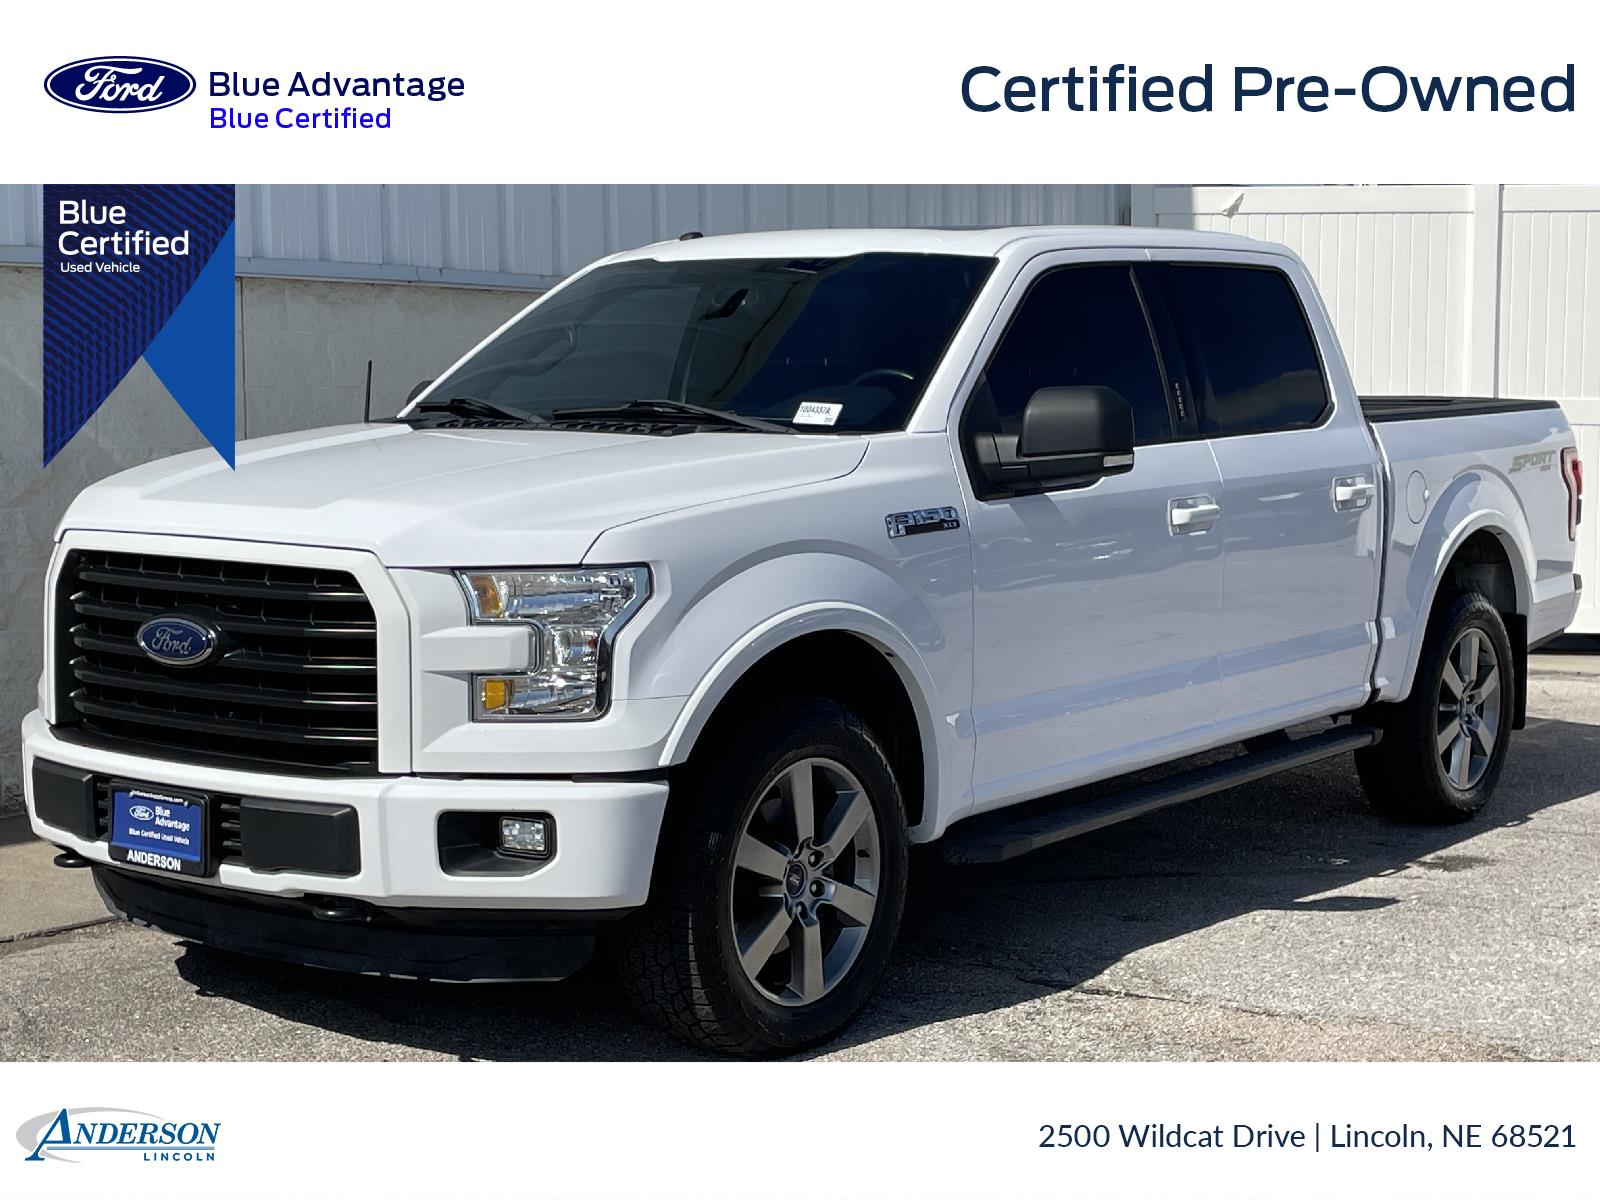 Used 2016 Ford F-150 XLT Crew Cab Truck for sale in Lincoln NE